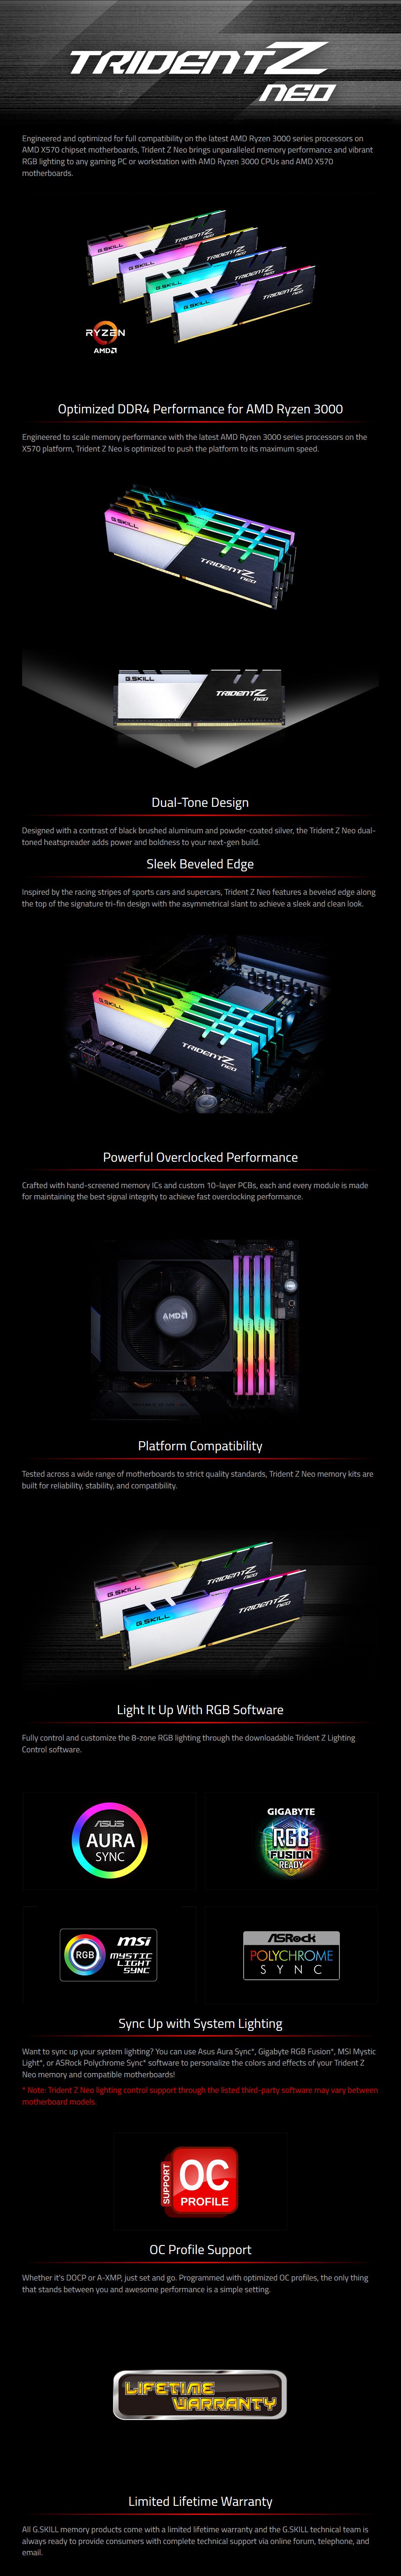 A large marketing image providing additional information about the product G.Skill 32GB Kit (2x16GB) DDR4 Trident Z RGB Neo C18 3600Mhz - Black - Additional alt info not provided